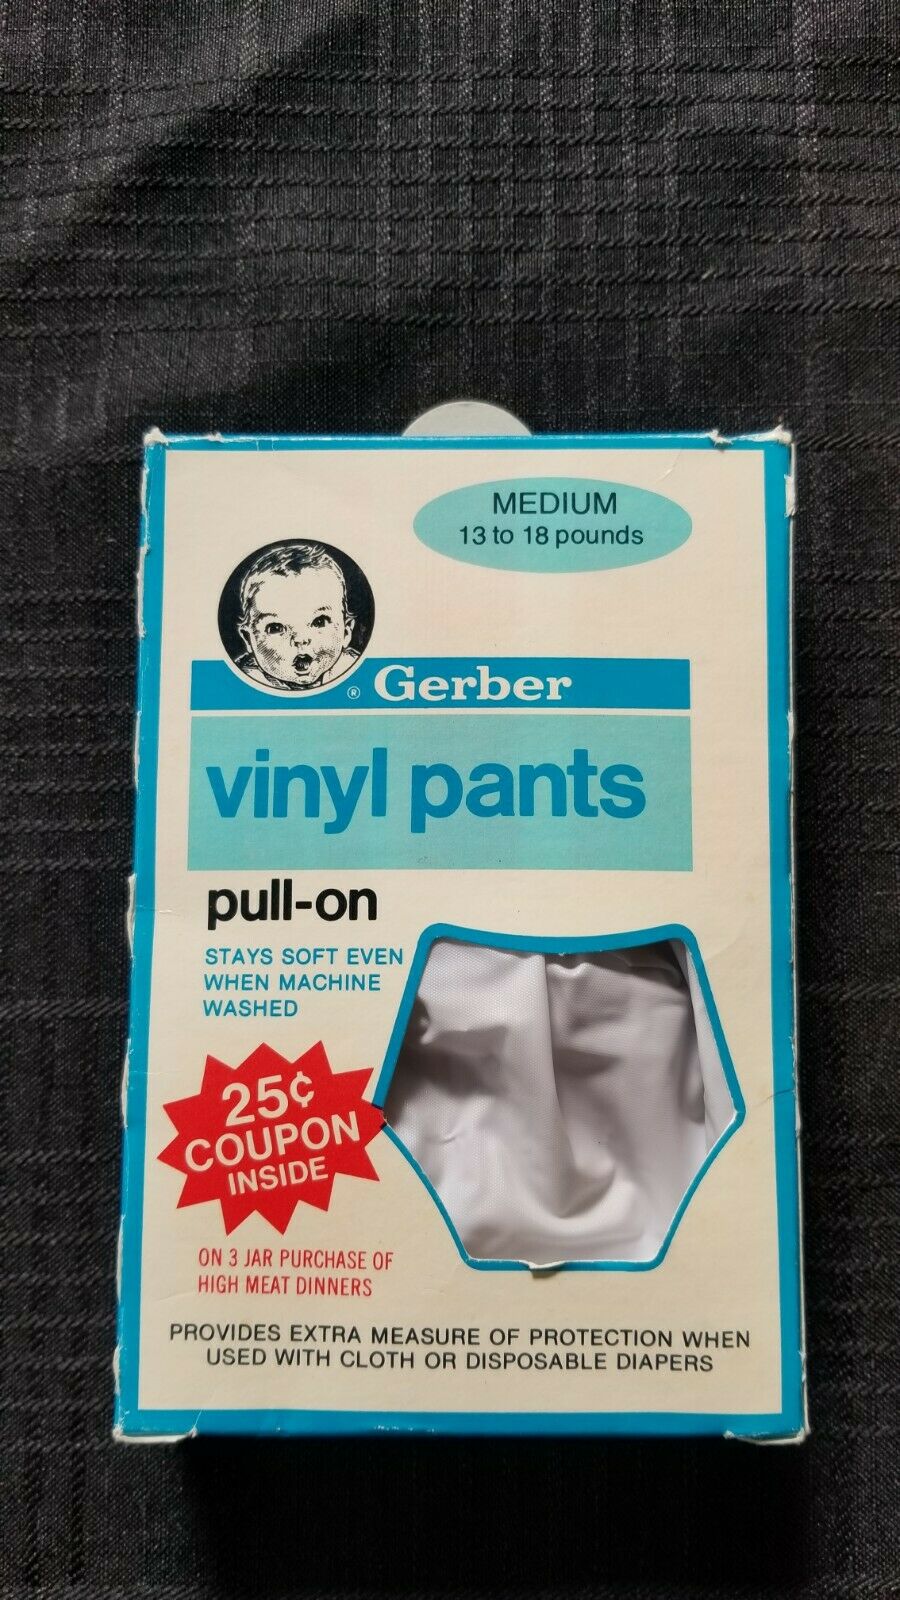 Vintage Gerber Vinyl Pants Pull-on Baby Size Medium 13 To 18 Pounds